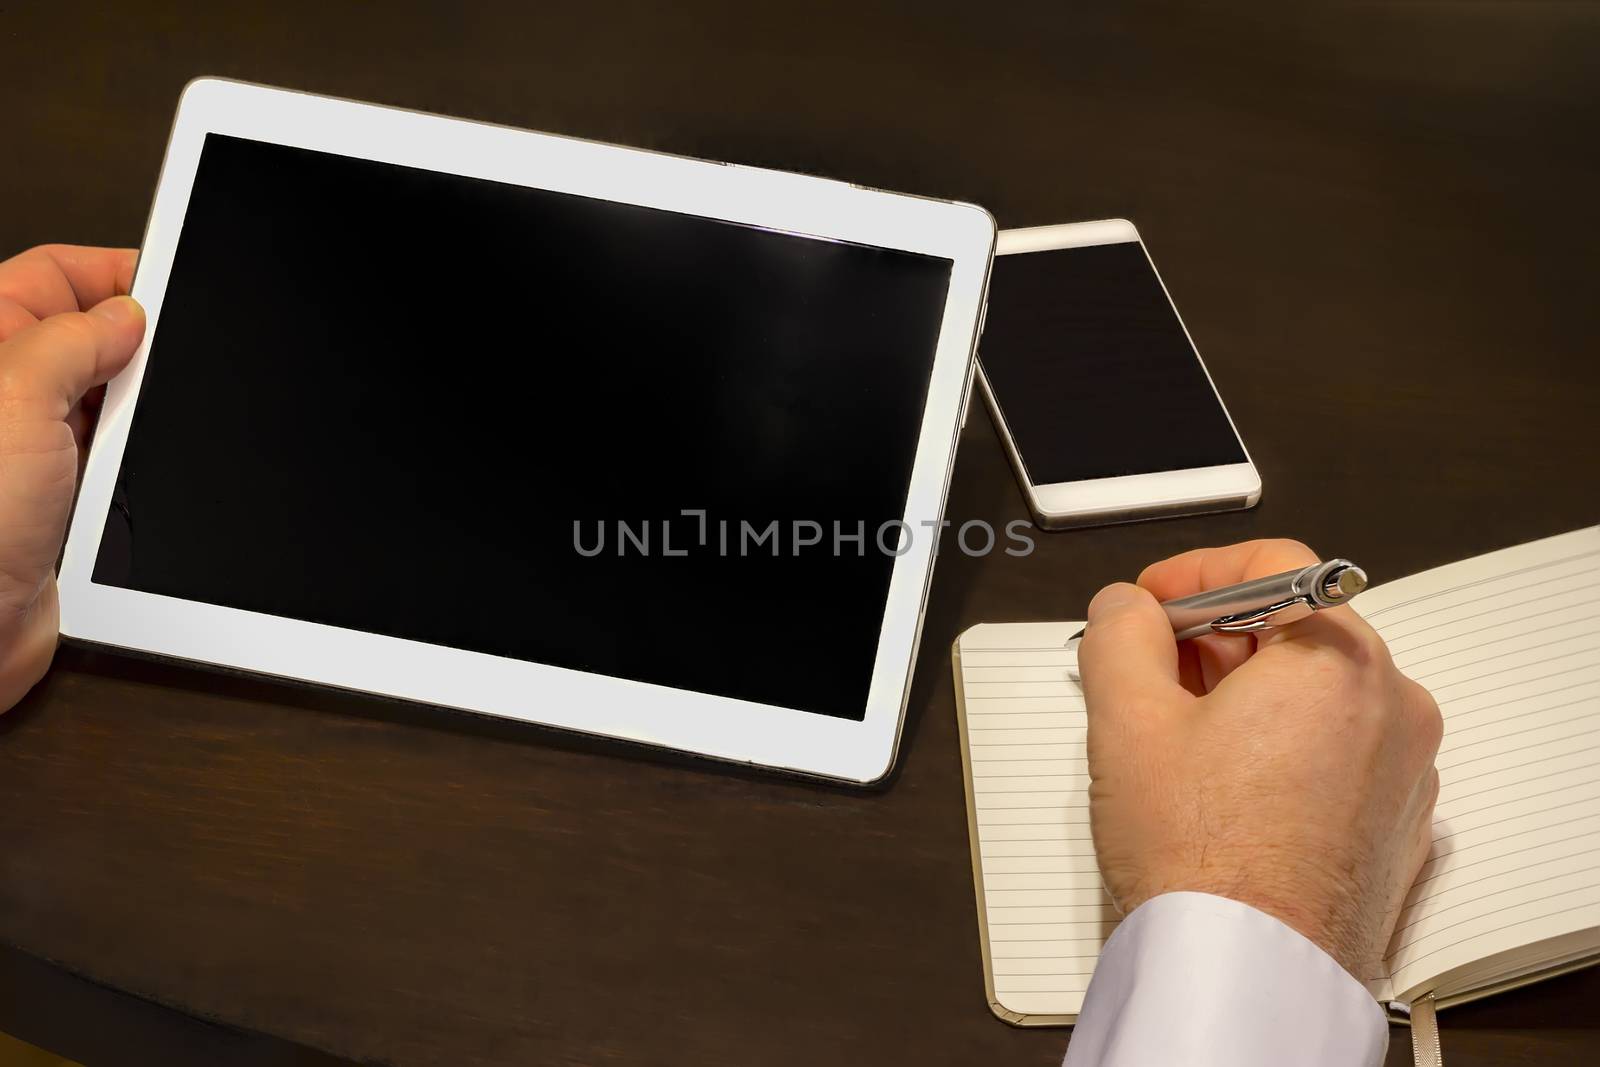 Work place - a businessman writes information from a tablet to the notebook